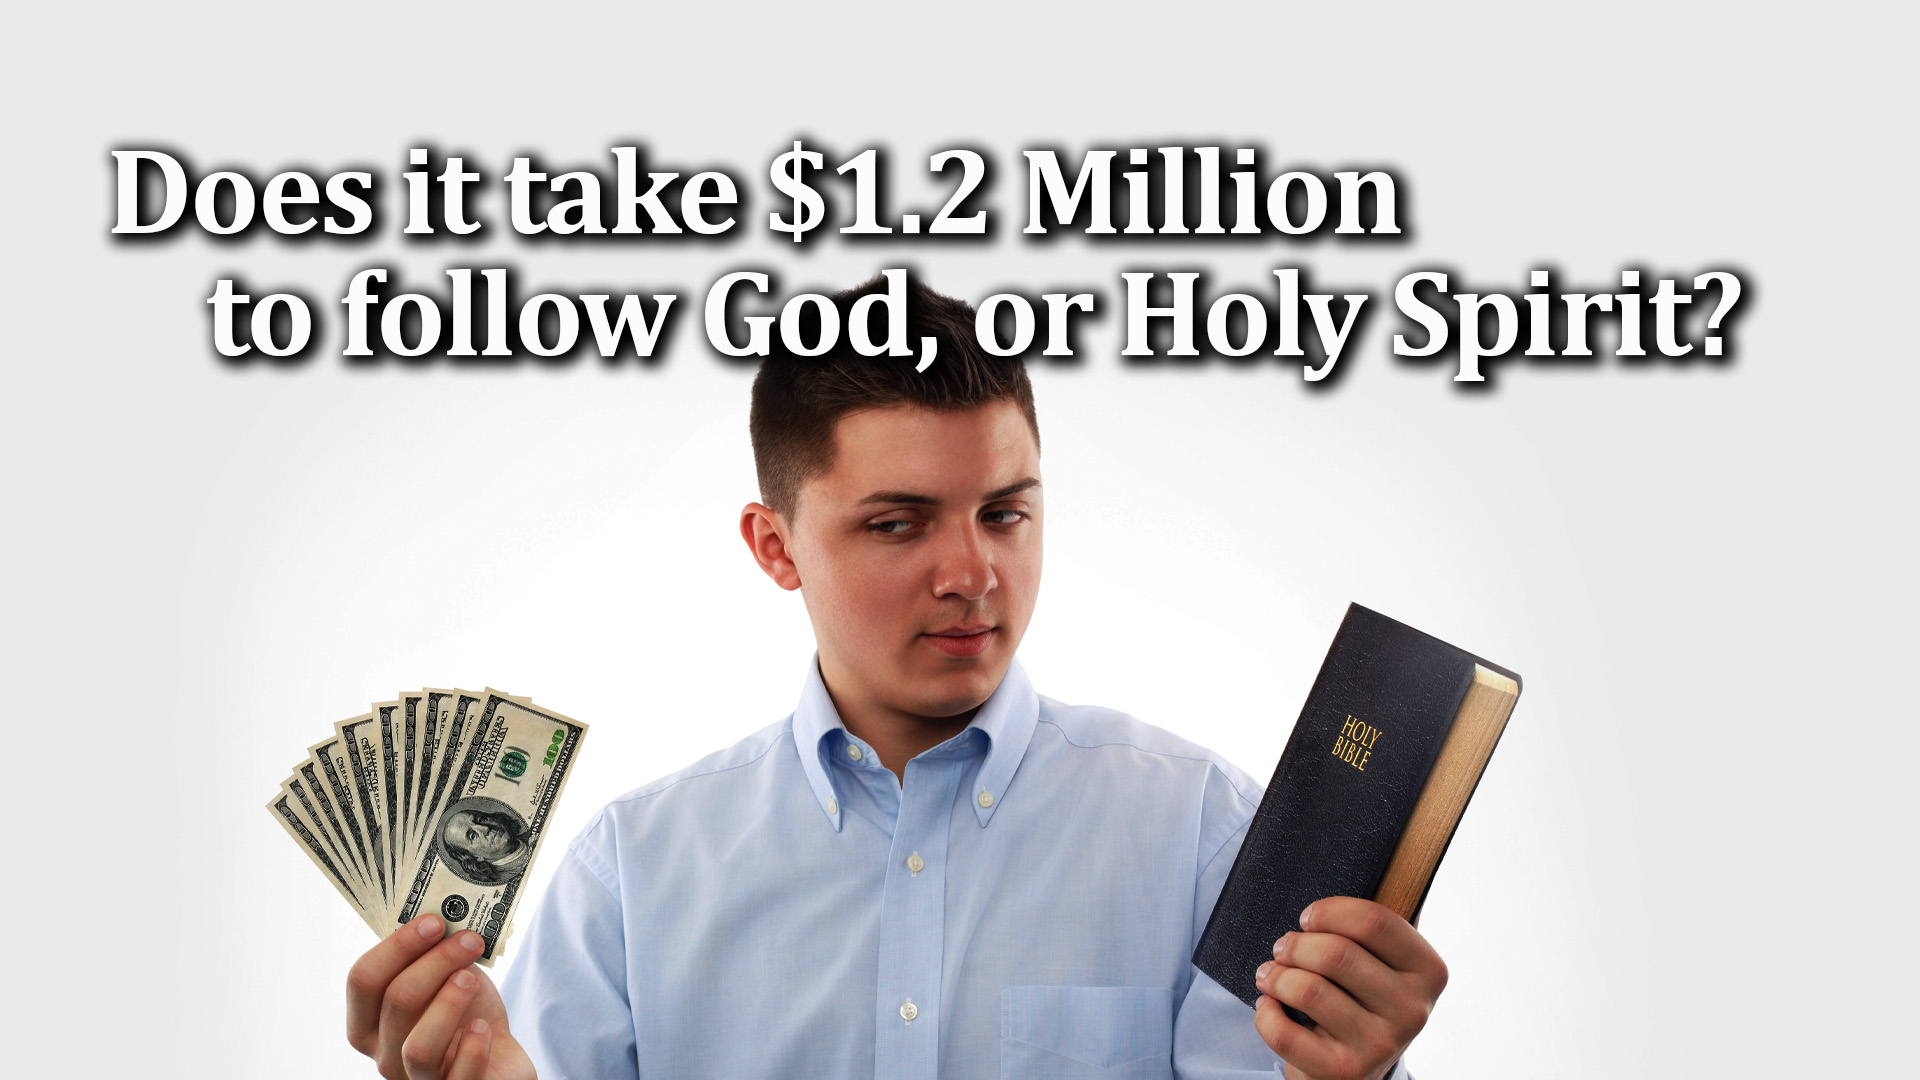 11-16-21 Does it Take 1.2 Million to follow God or Holy Spirit